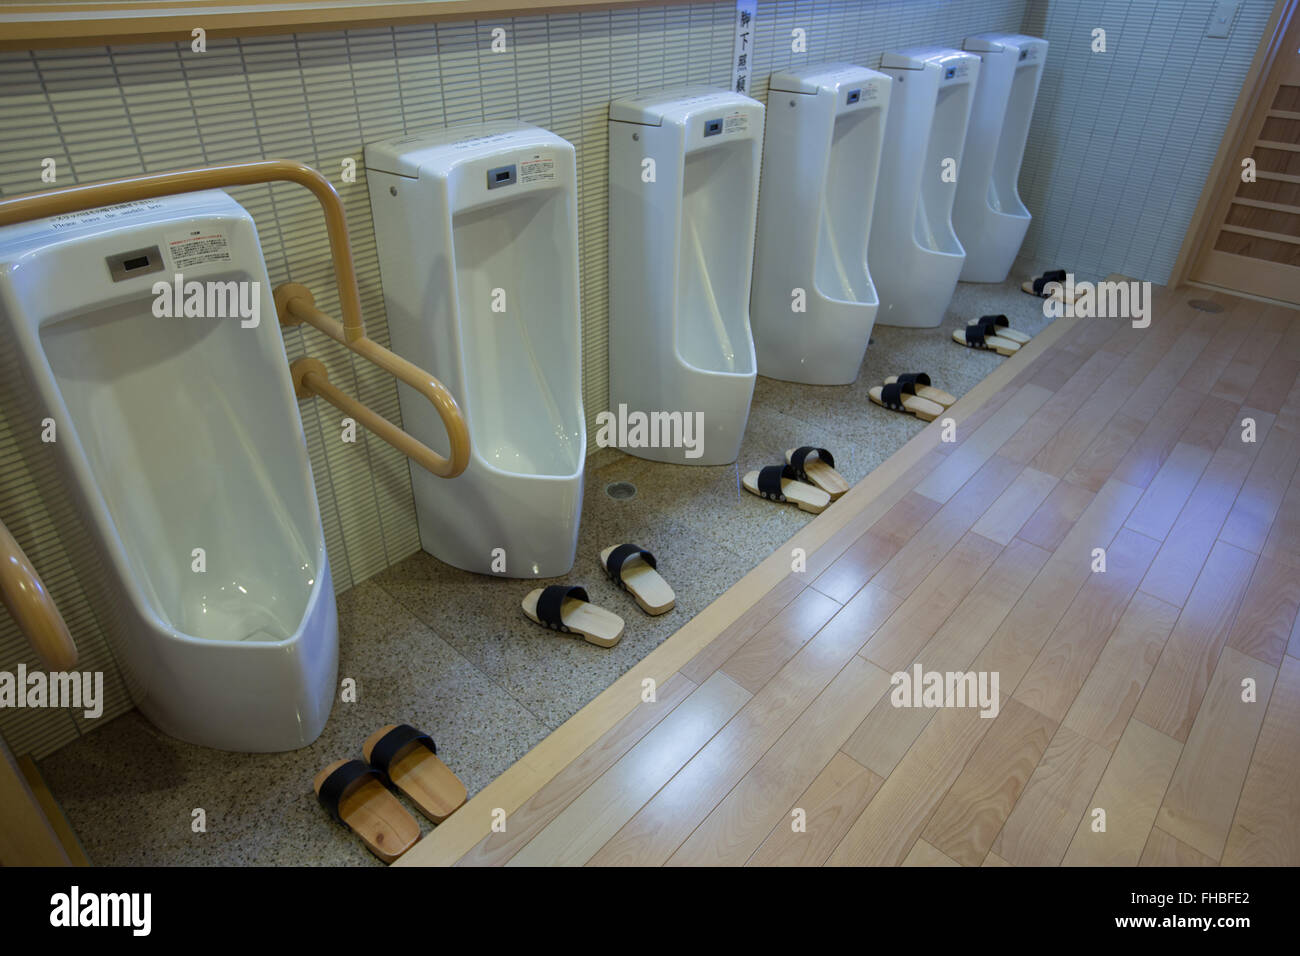 urinals in a shrine in Japan with sandals Stock Photo